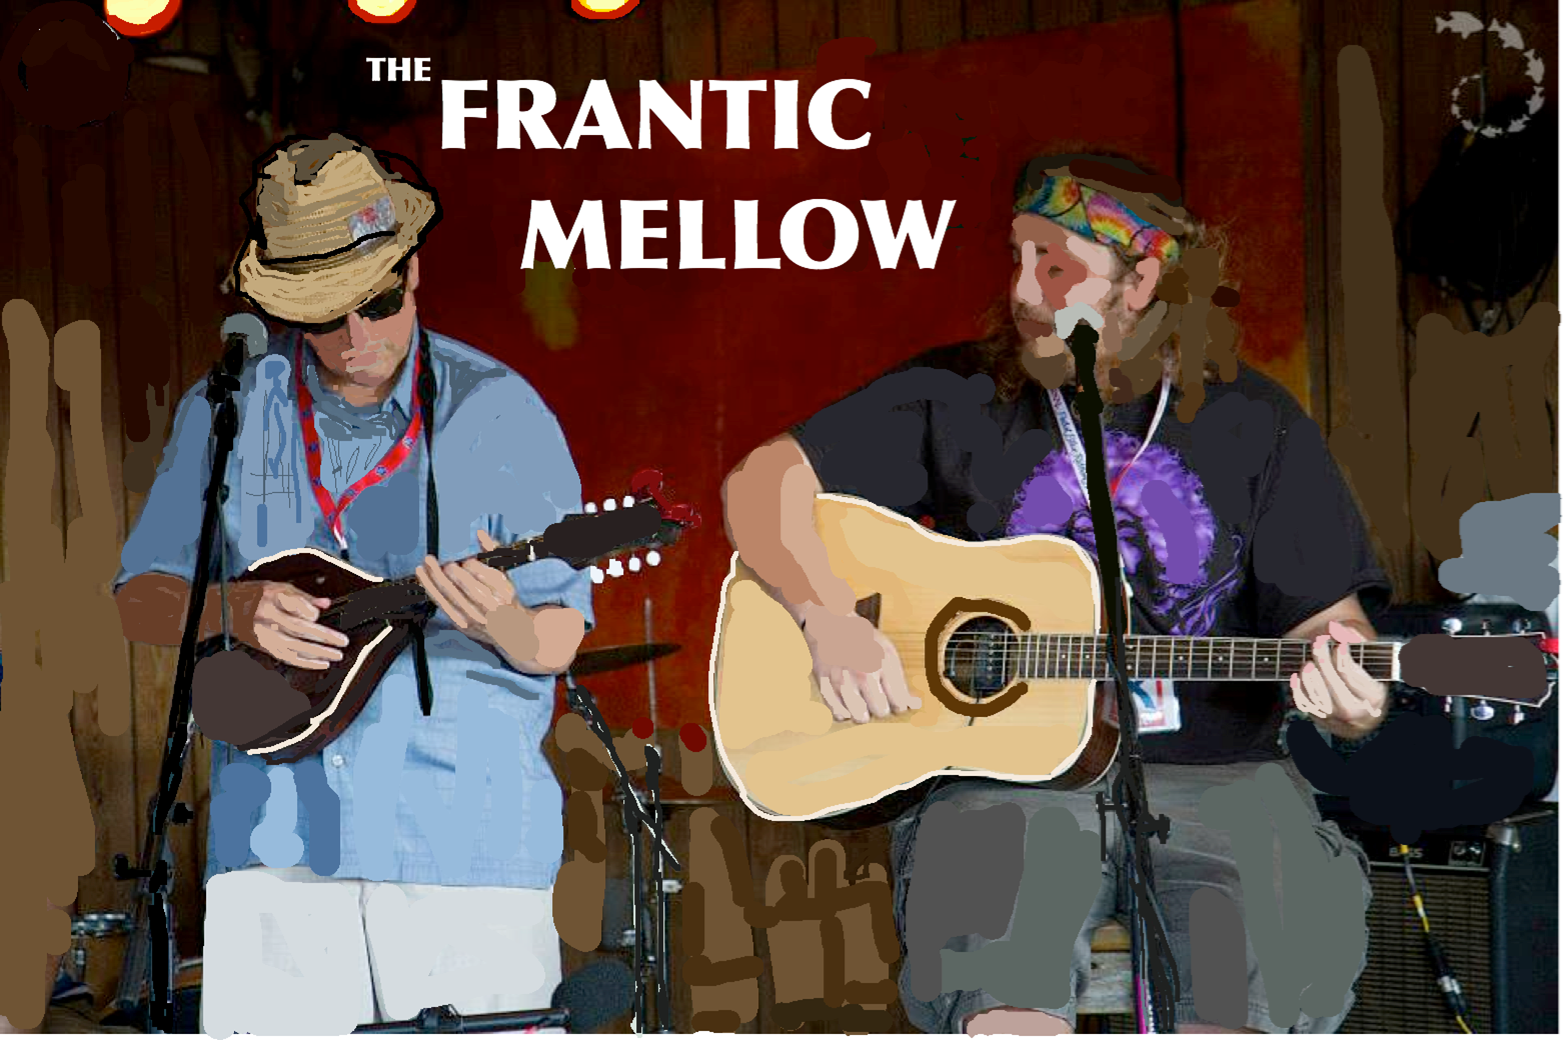 The Frantic Mellow